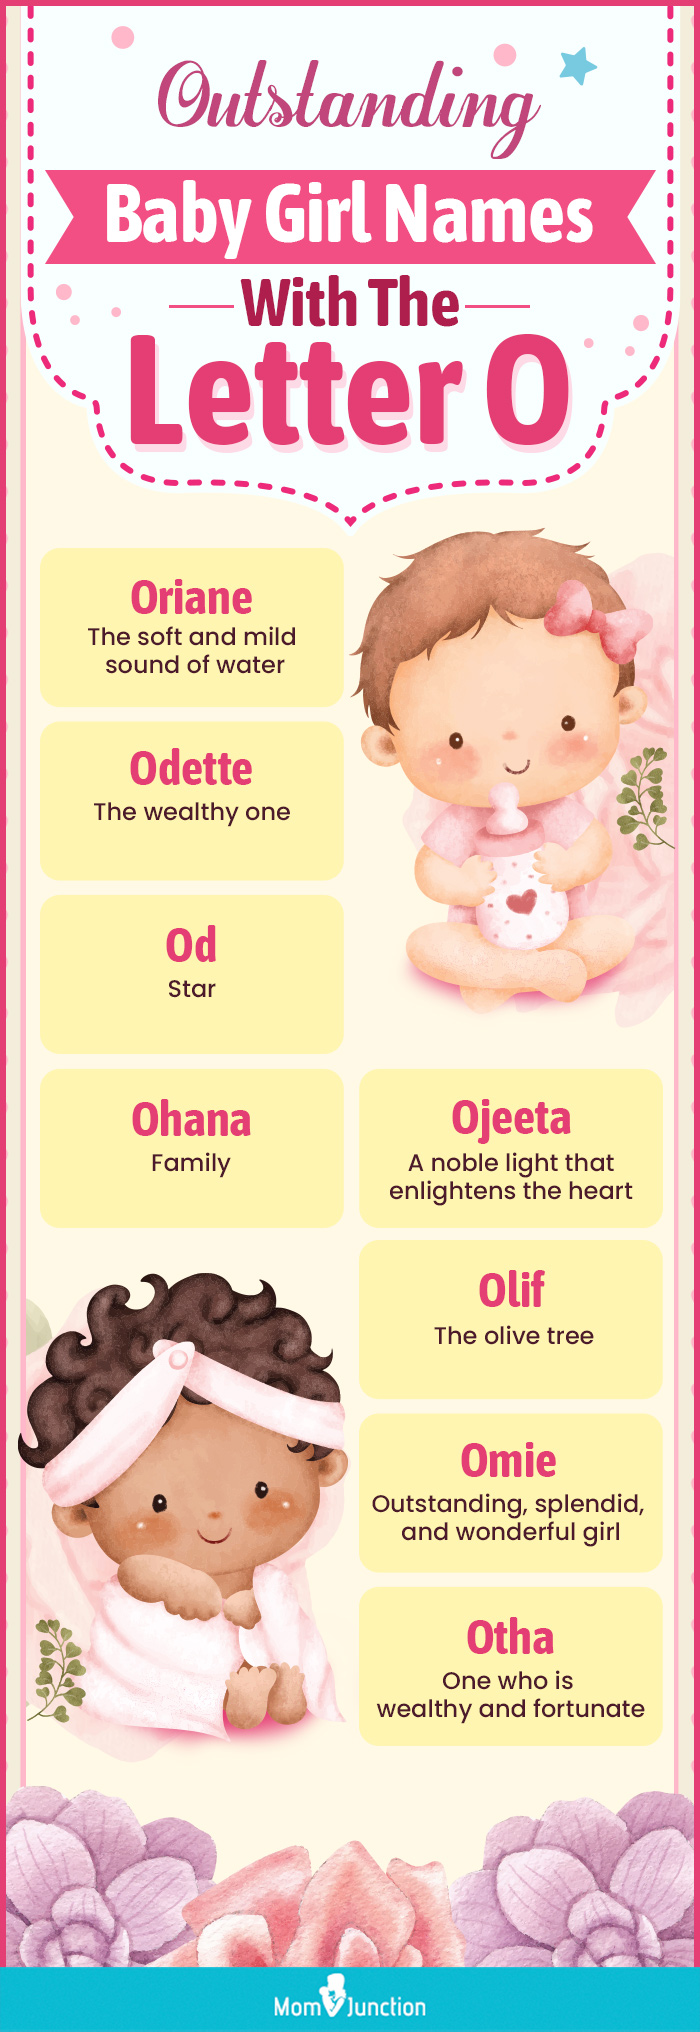 outstanding baby girl names with the letter o (infographic)